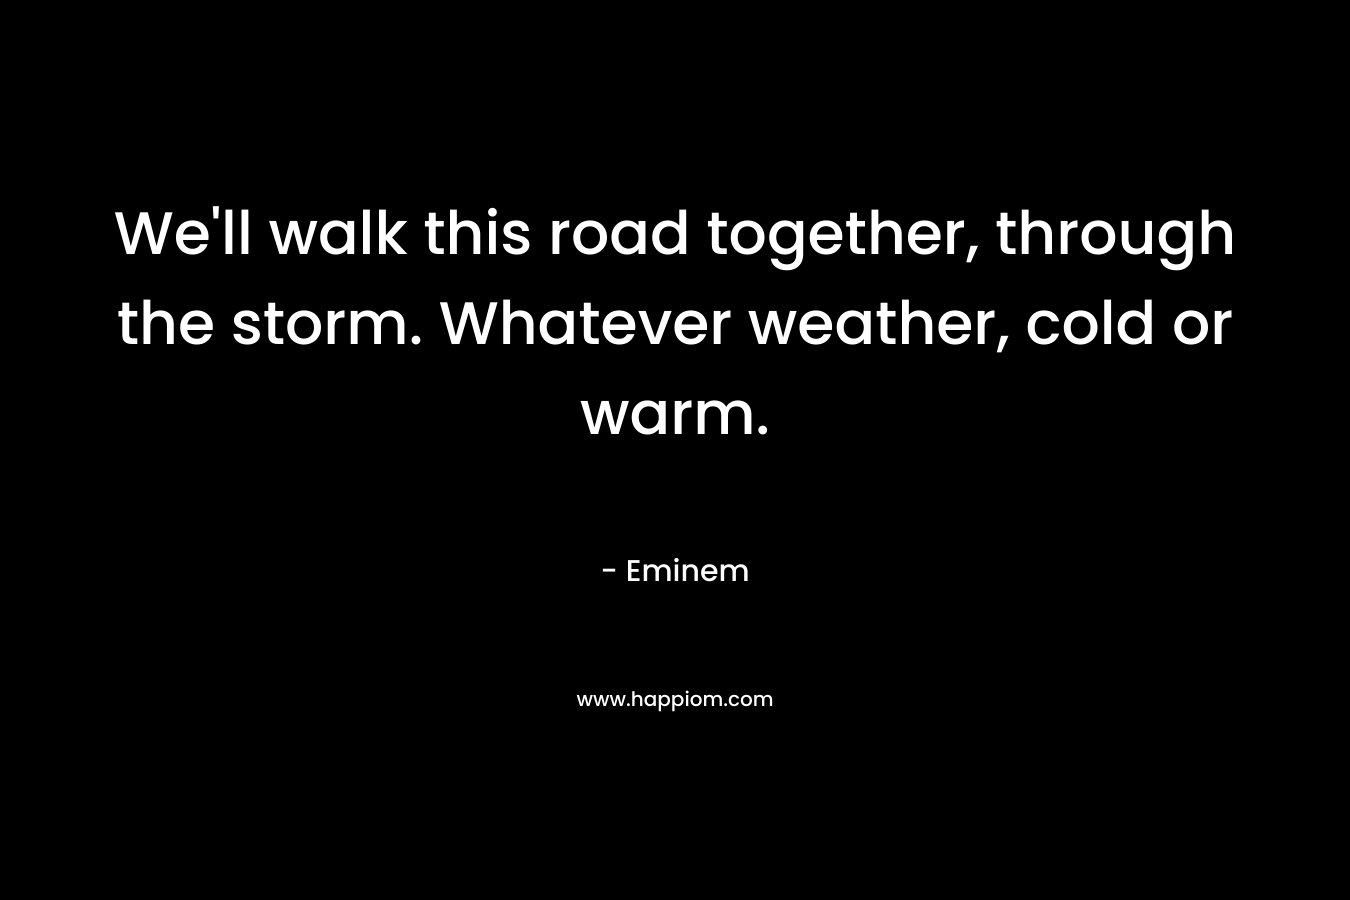 We’ll walk this road together, through the storm. Whatever weather, cold or warm. – Eminem